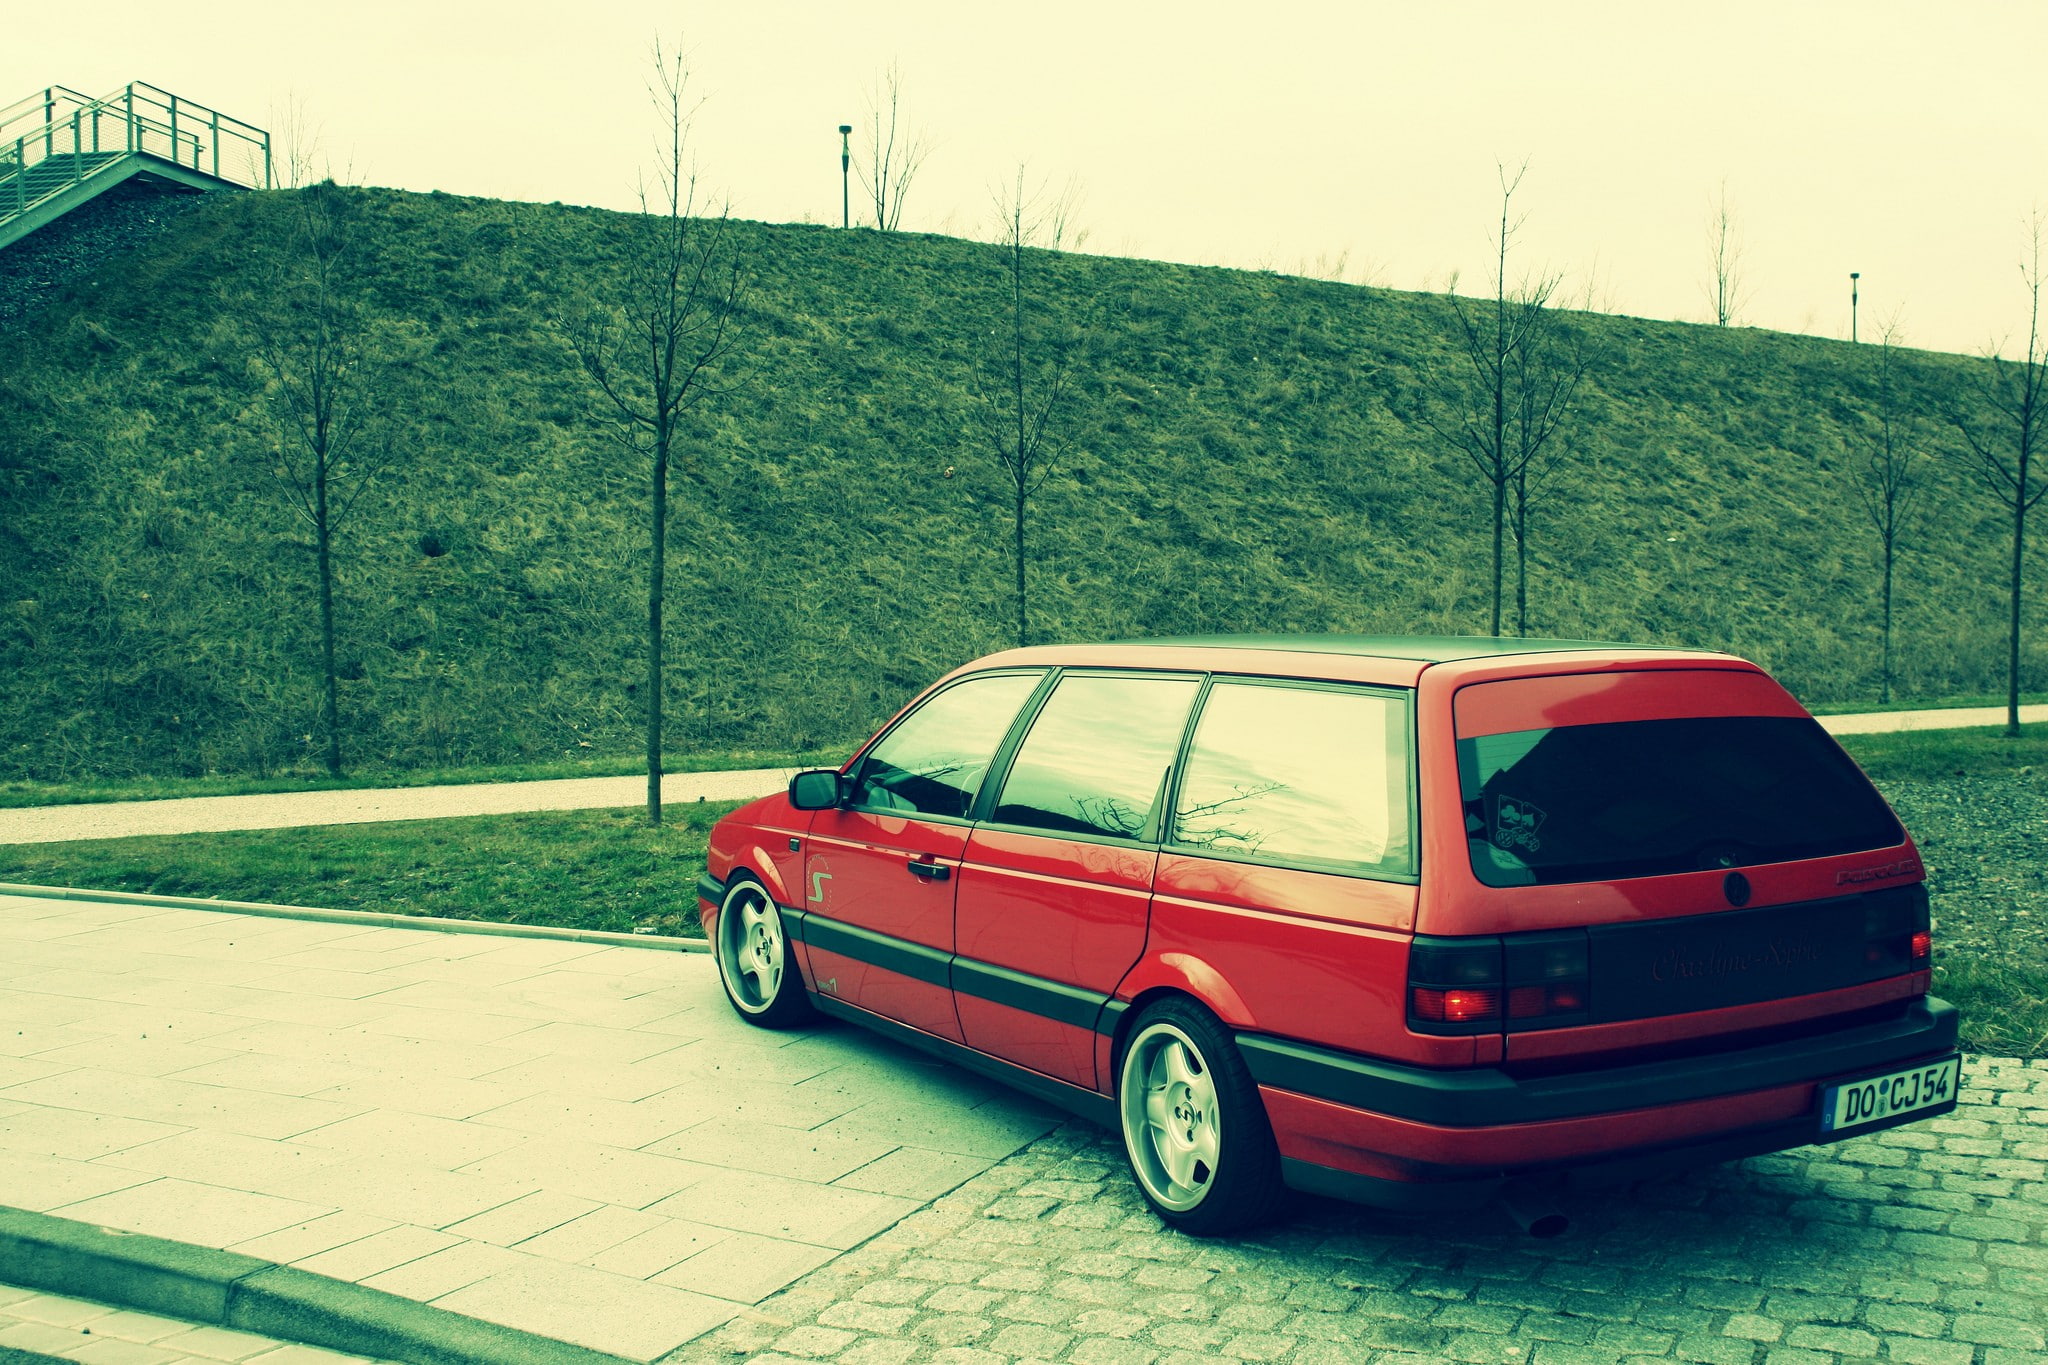 passat, Stance, red cars, outdoors, vehicle